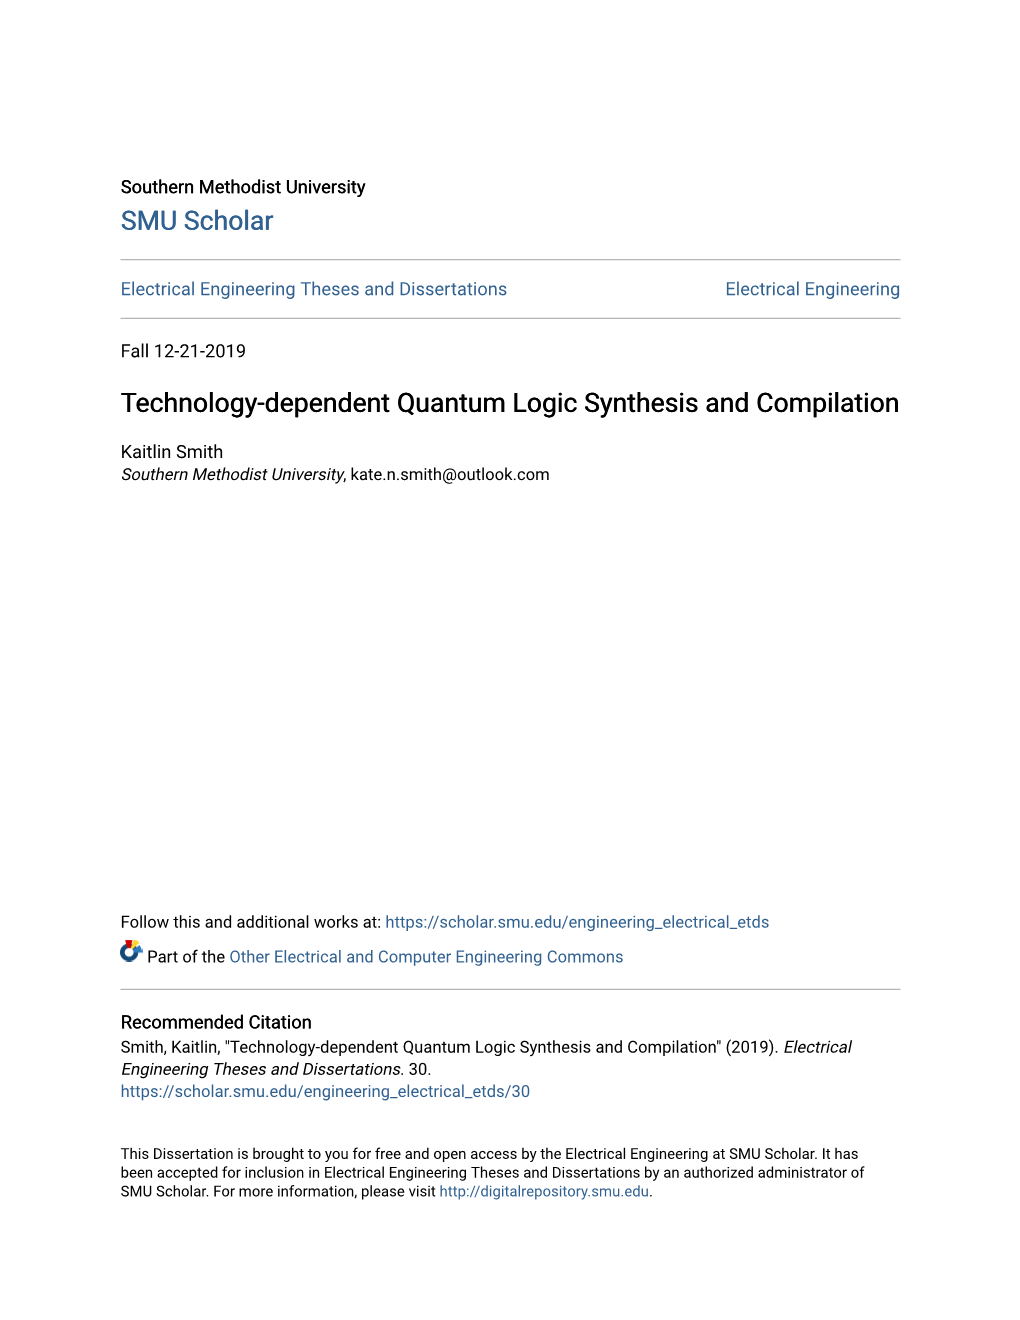 Technology-Dependent Quantum Logic Synthesis and Compilation